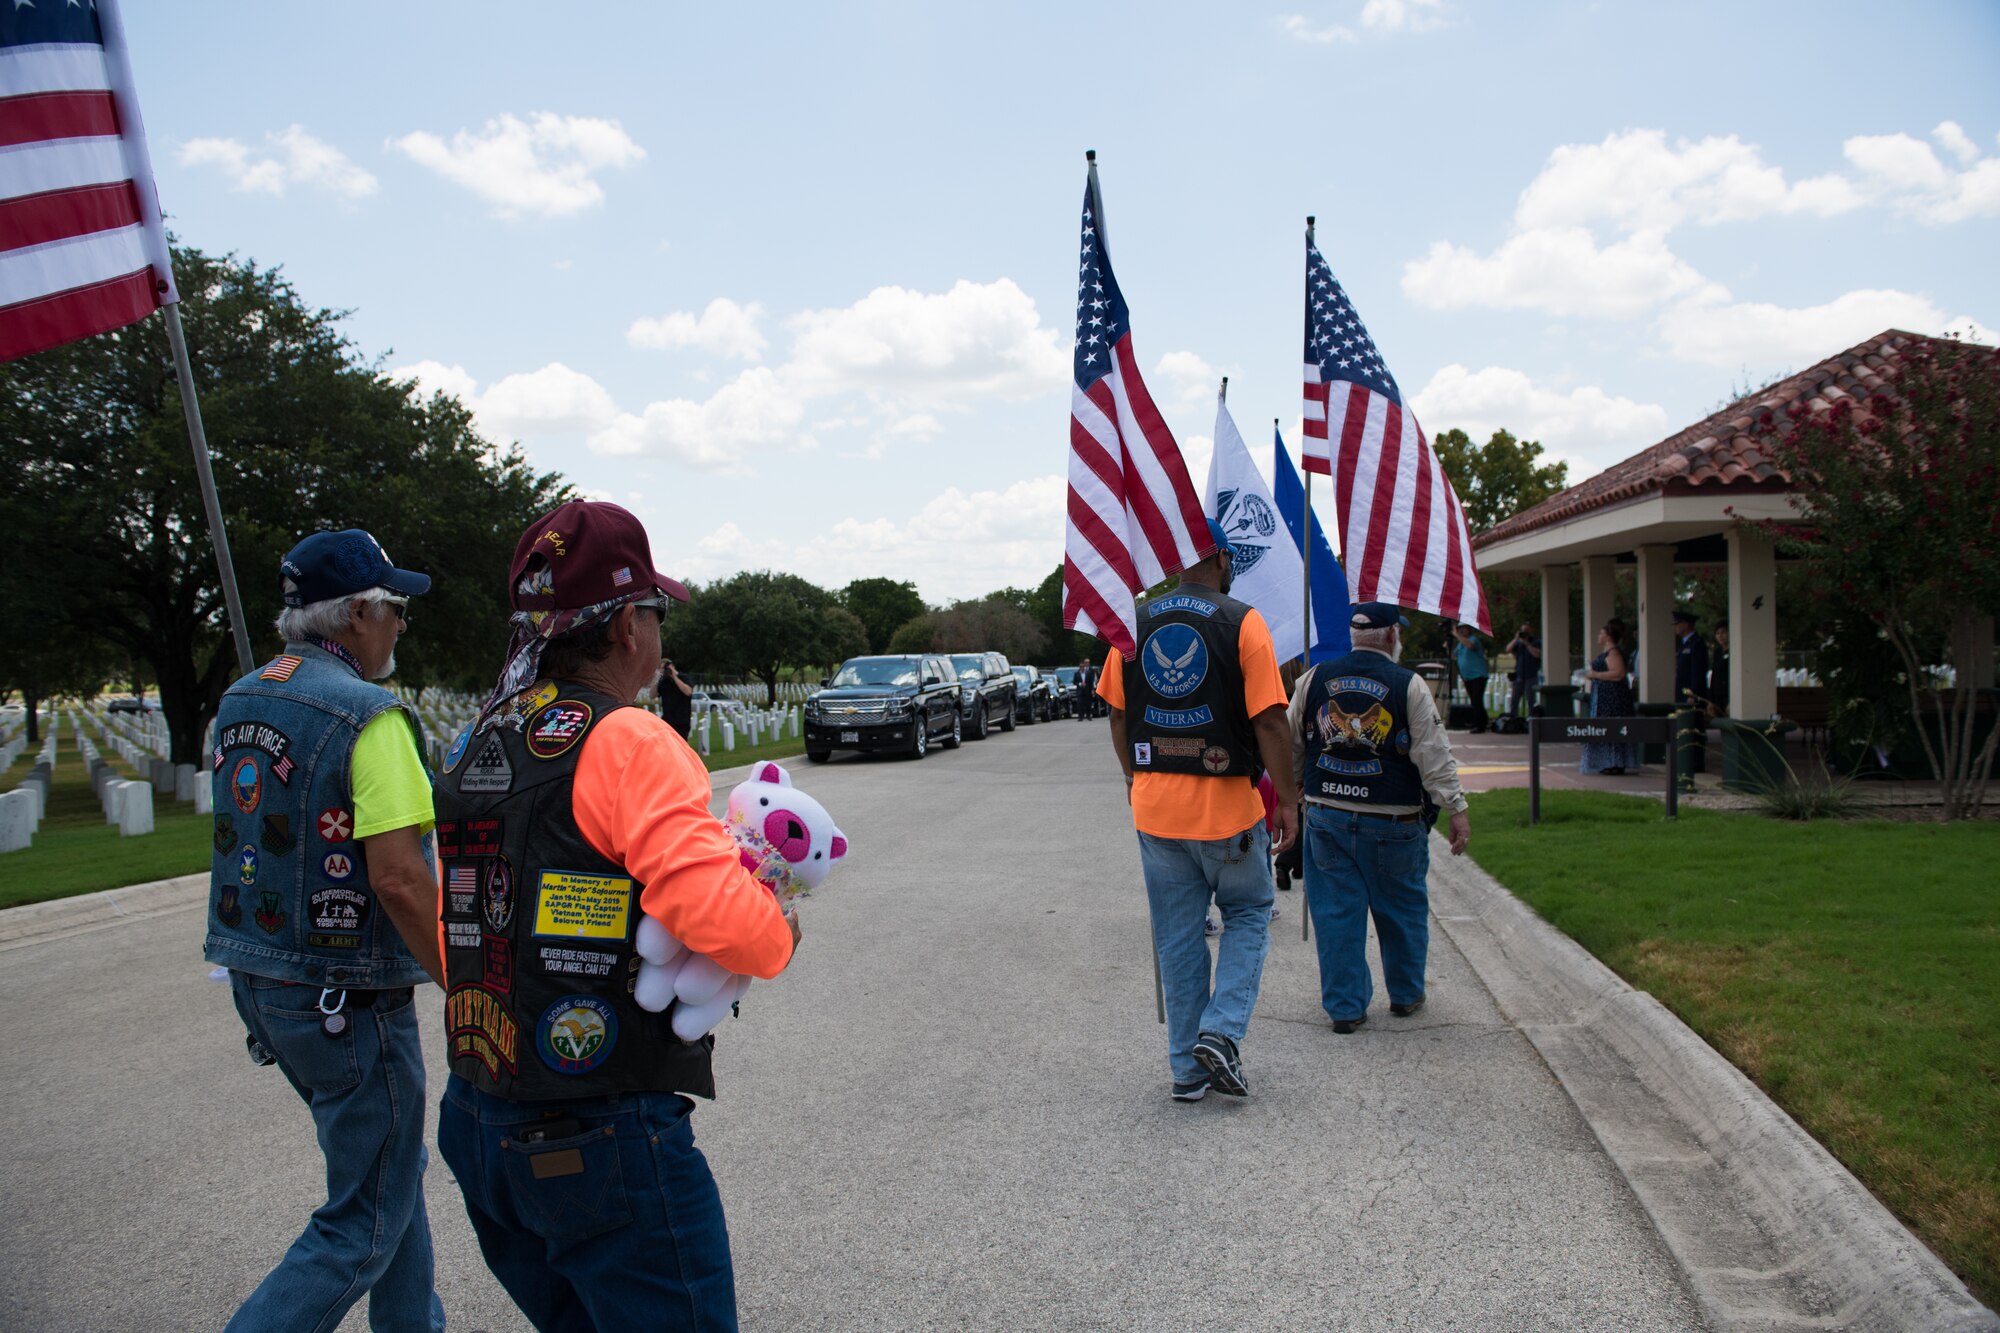 Members of the Patriot Riders arrive to support the funeral ceremony of Oliver "Ollie" Crawford Aug. 5, 2019, at Joint Base San Antonio-Fort Sam Houston, Texas. "Ollie" passed away at the age of 94, on Sunday, July 21, 2019 in San Antonio, Texas.